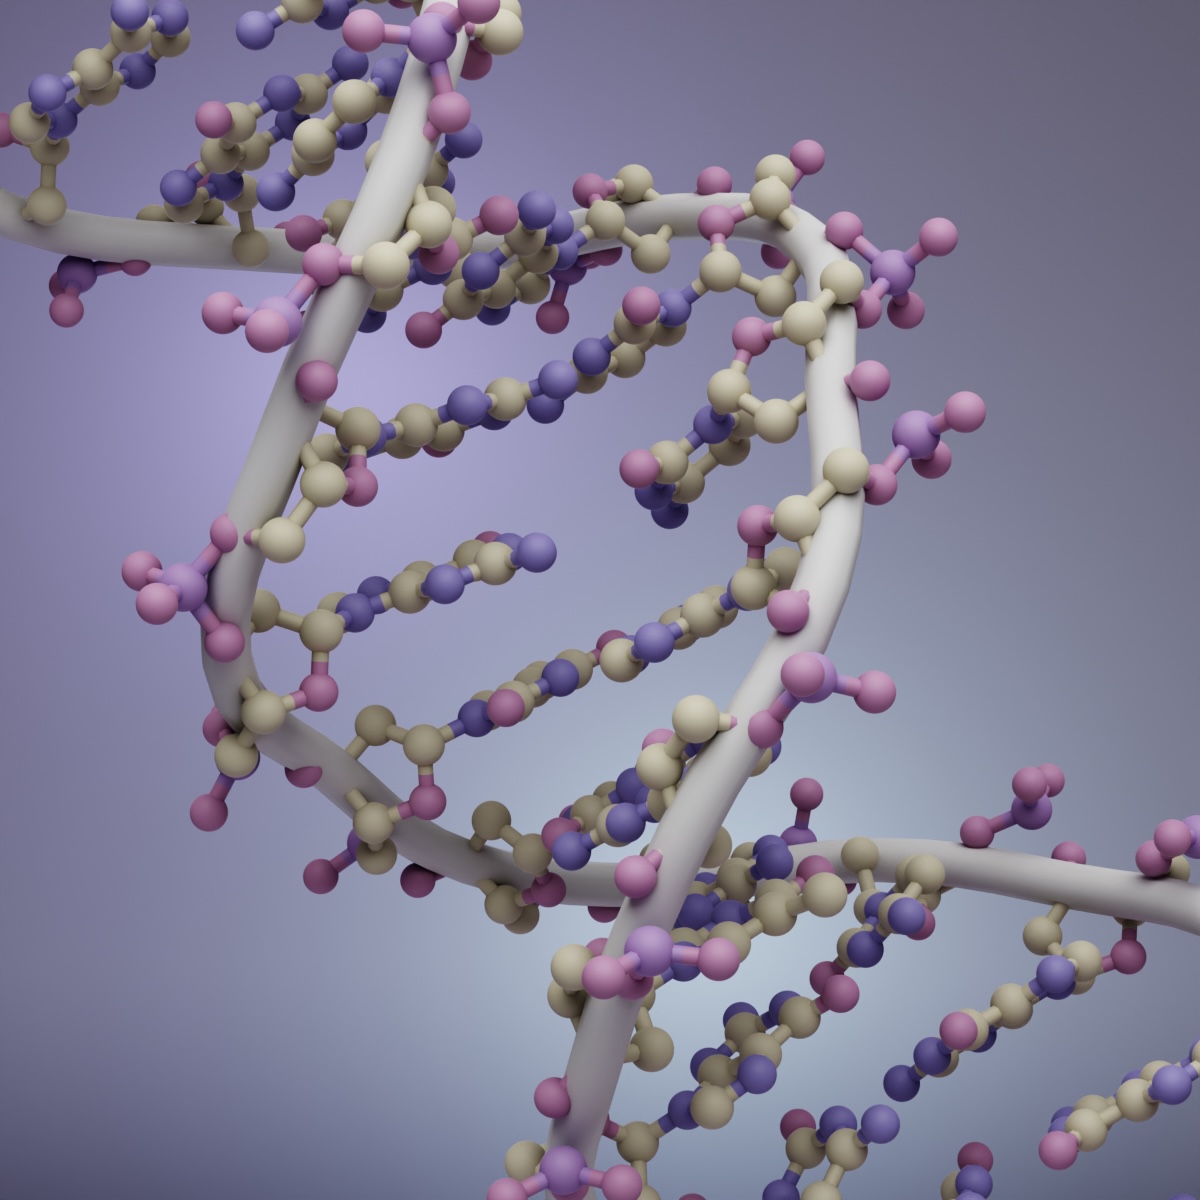 DNA in candy colors using #MolecularNodes by @bradyajohnston in Blender. DNA structure from PDBid 4ztu. 

#b3d #sciart @KumpulaPhysics